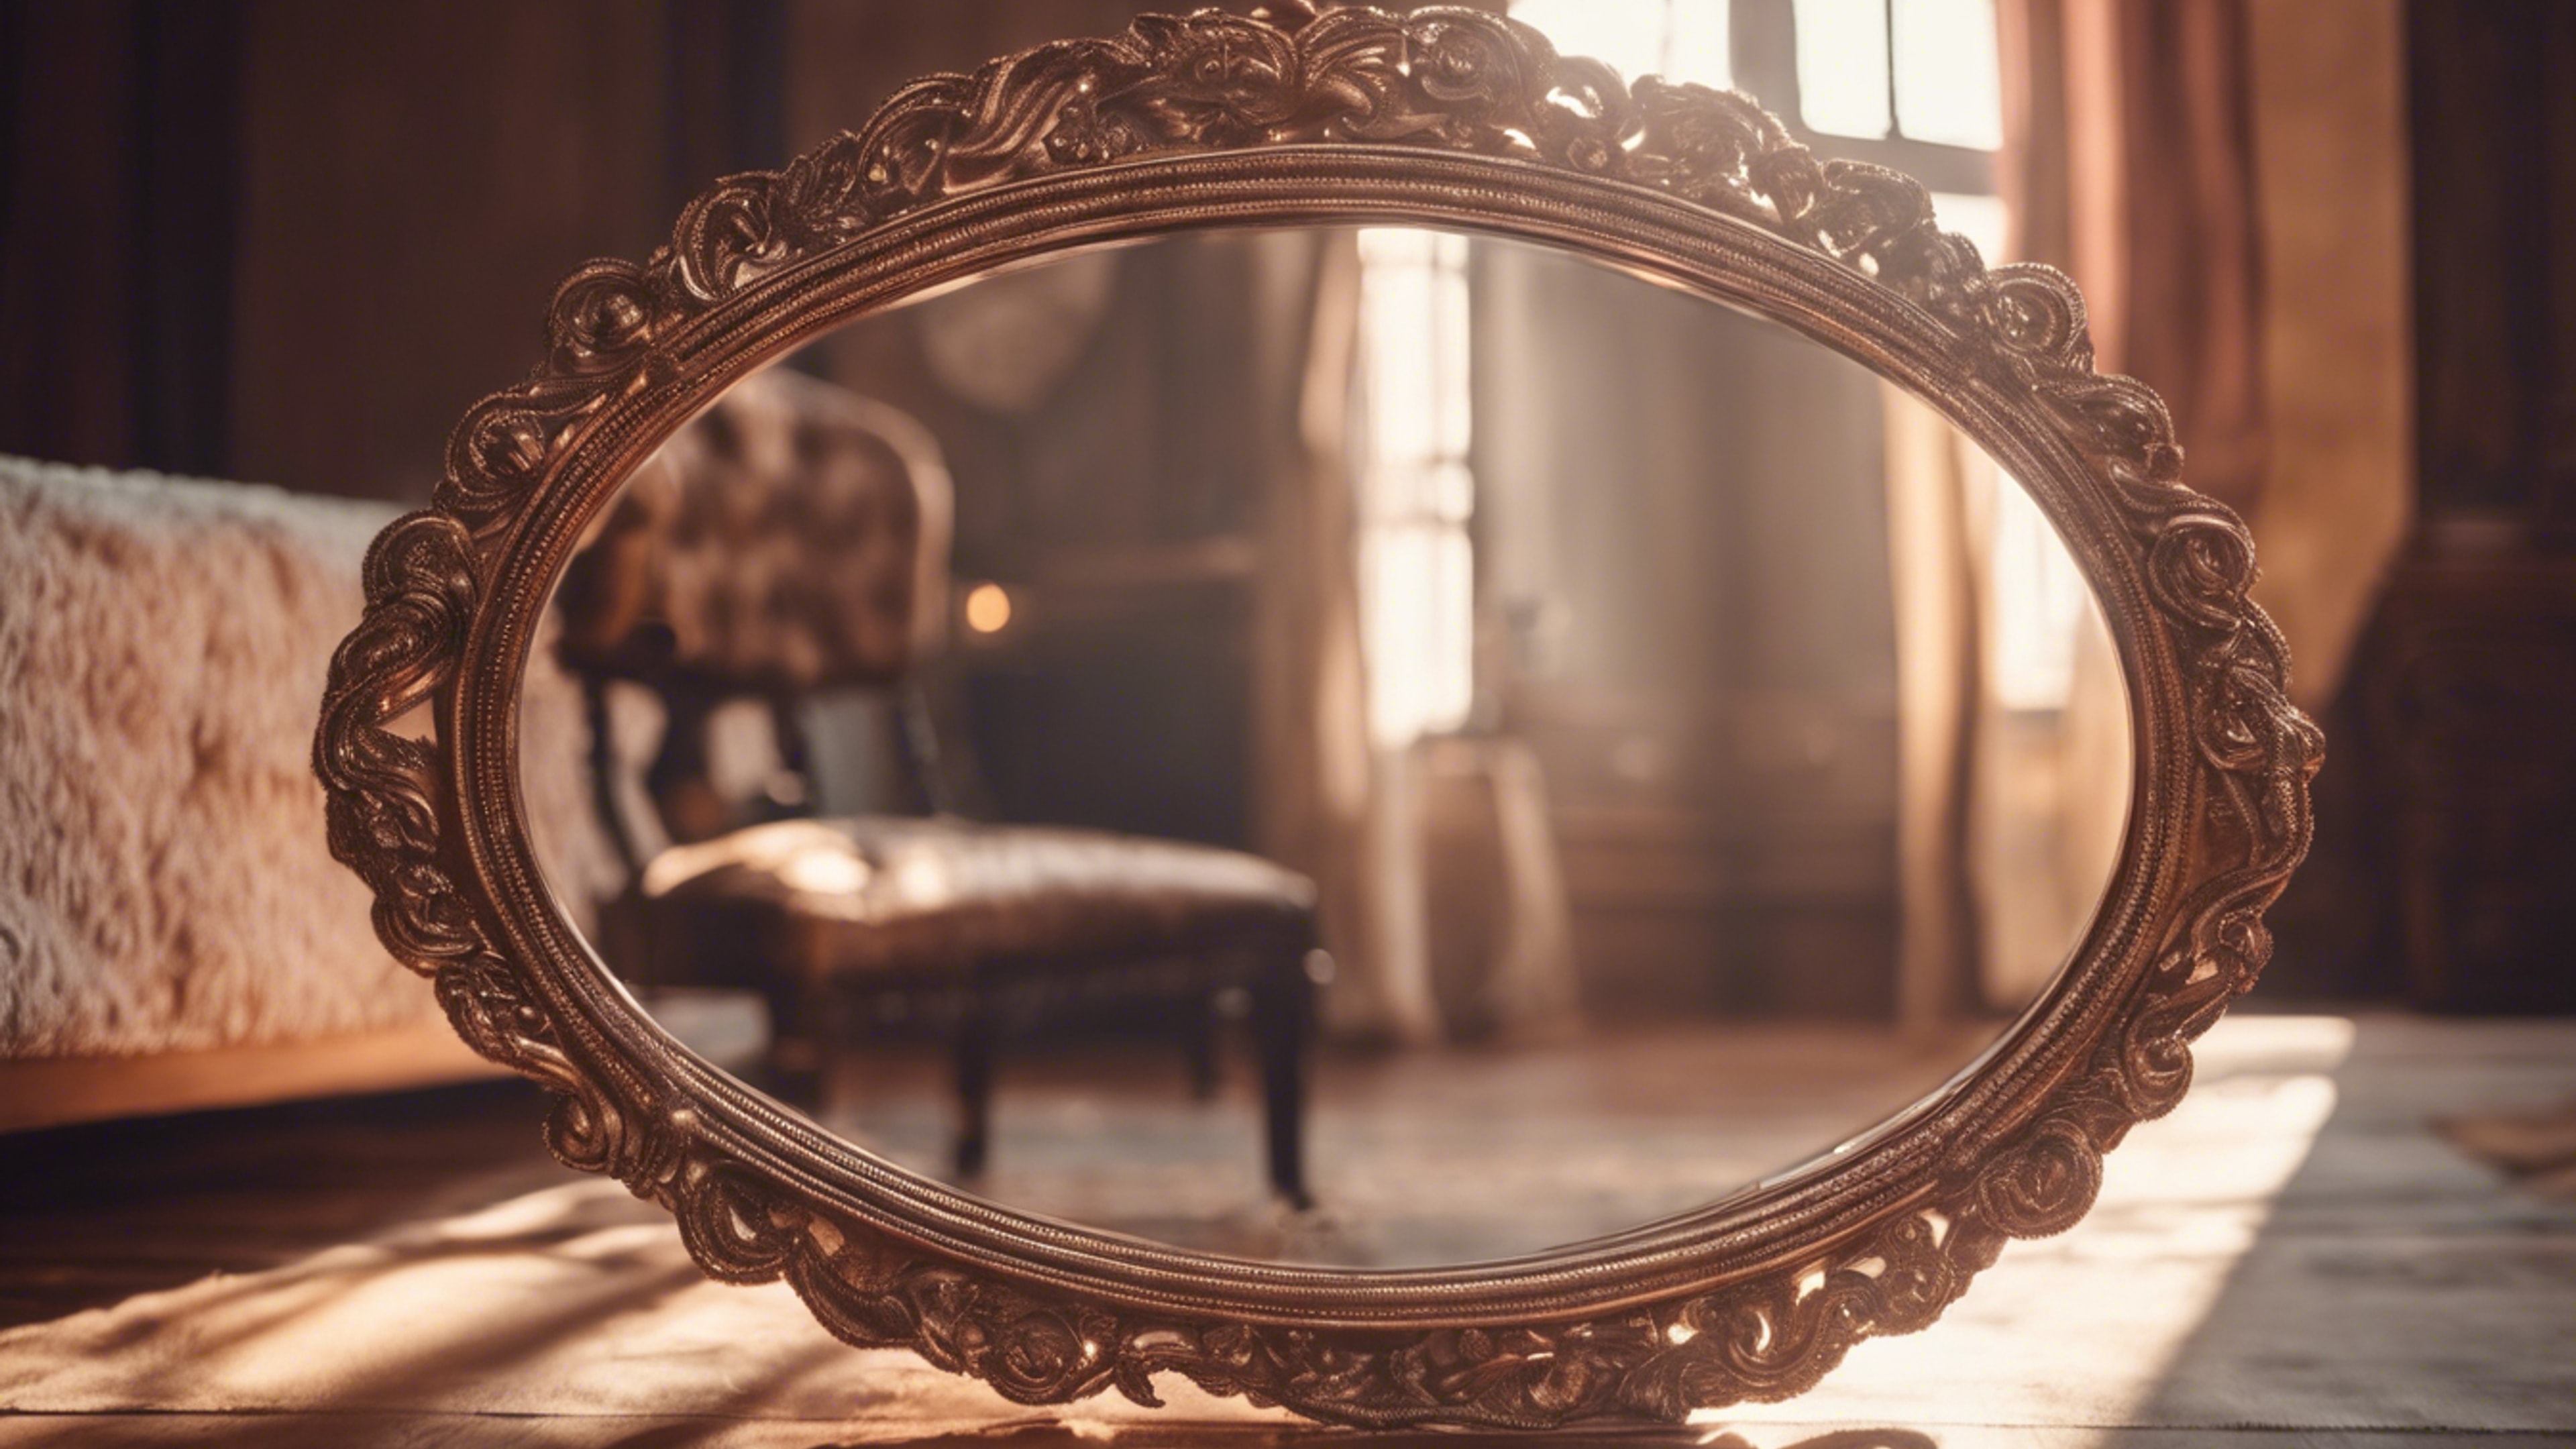 An antique rose gold mirror reflecting a sunlit, vintage-inspired room. Ταπετσαρία[df758999a7b143f09983]